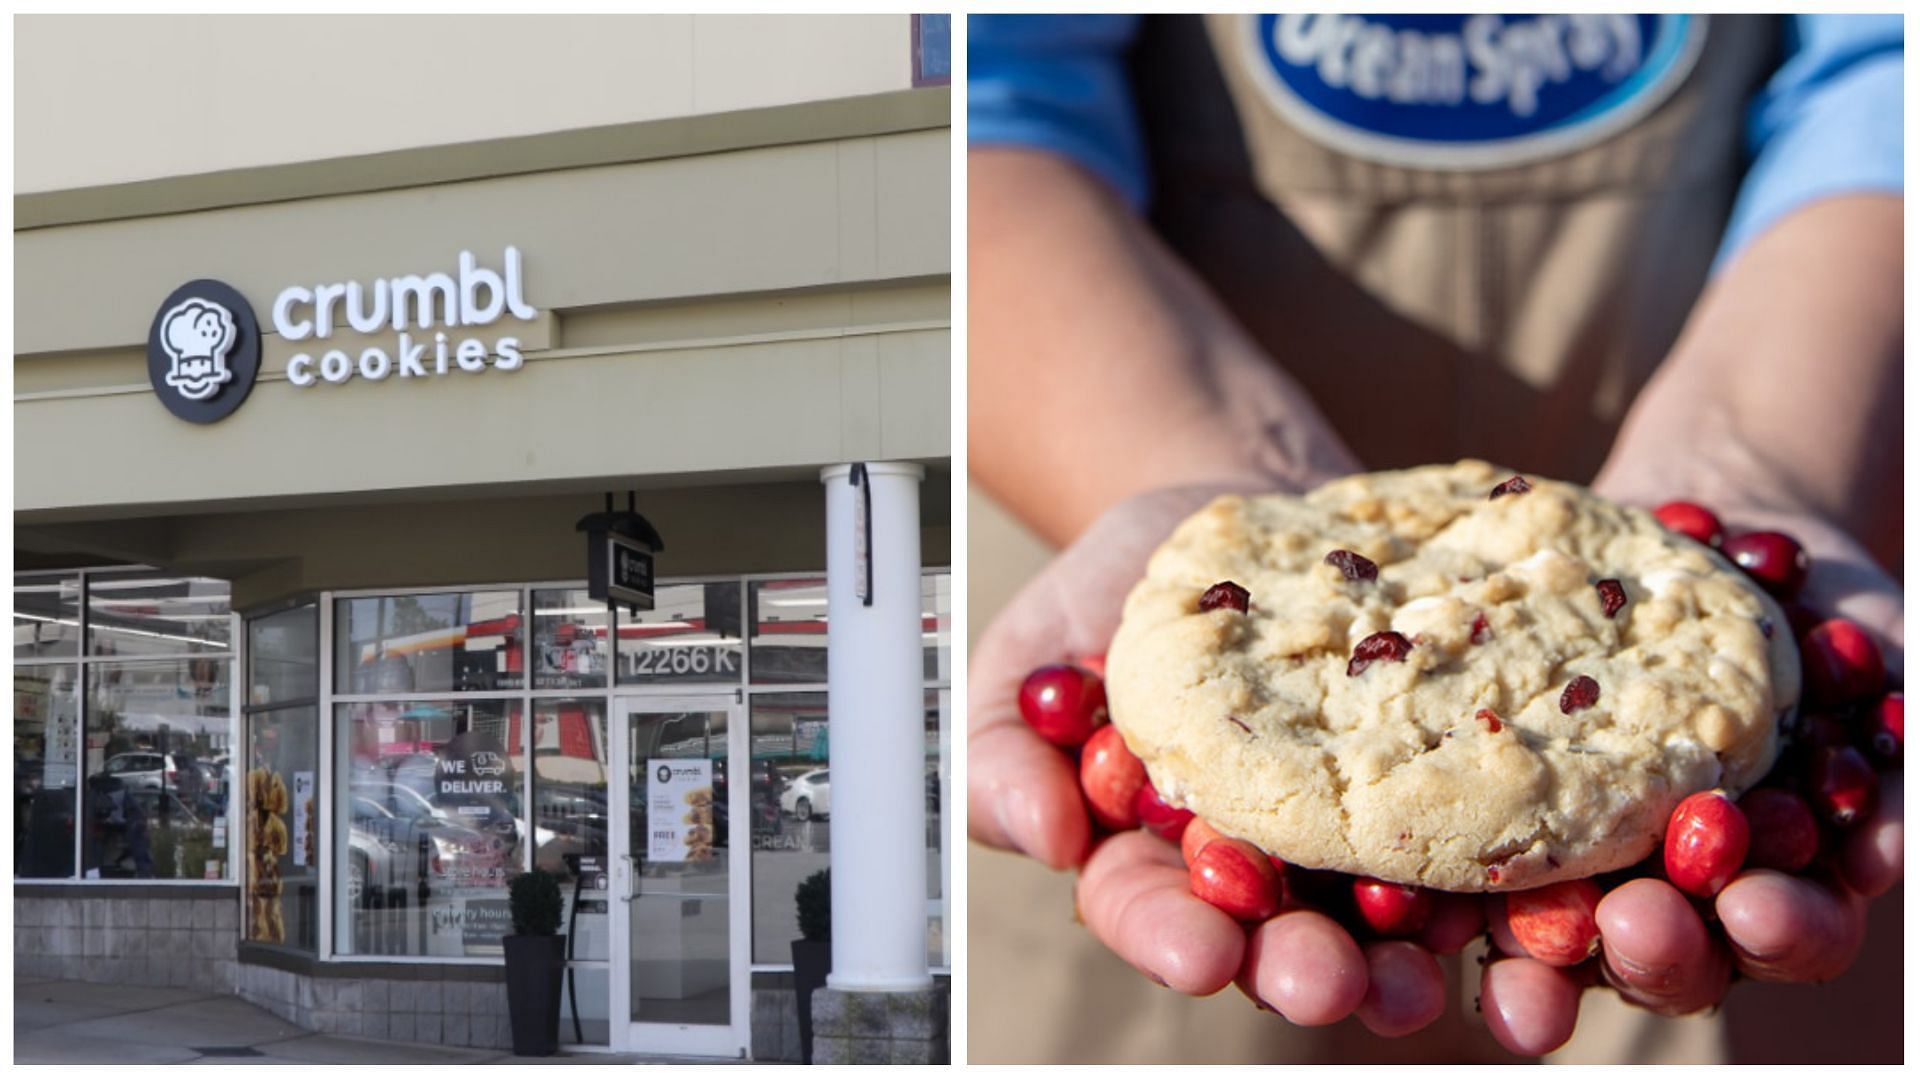 The All-New Cranberry White Chip from Crumbl Cookies! (Image via Crumbl Cookies)